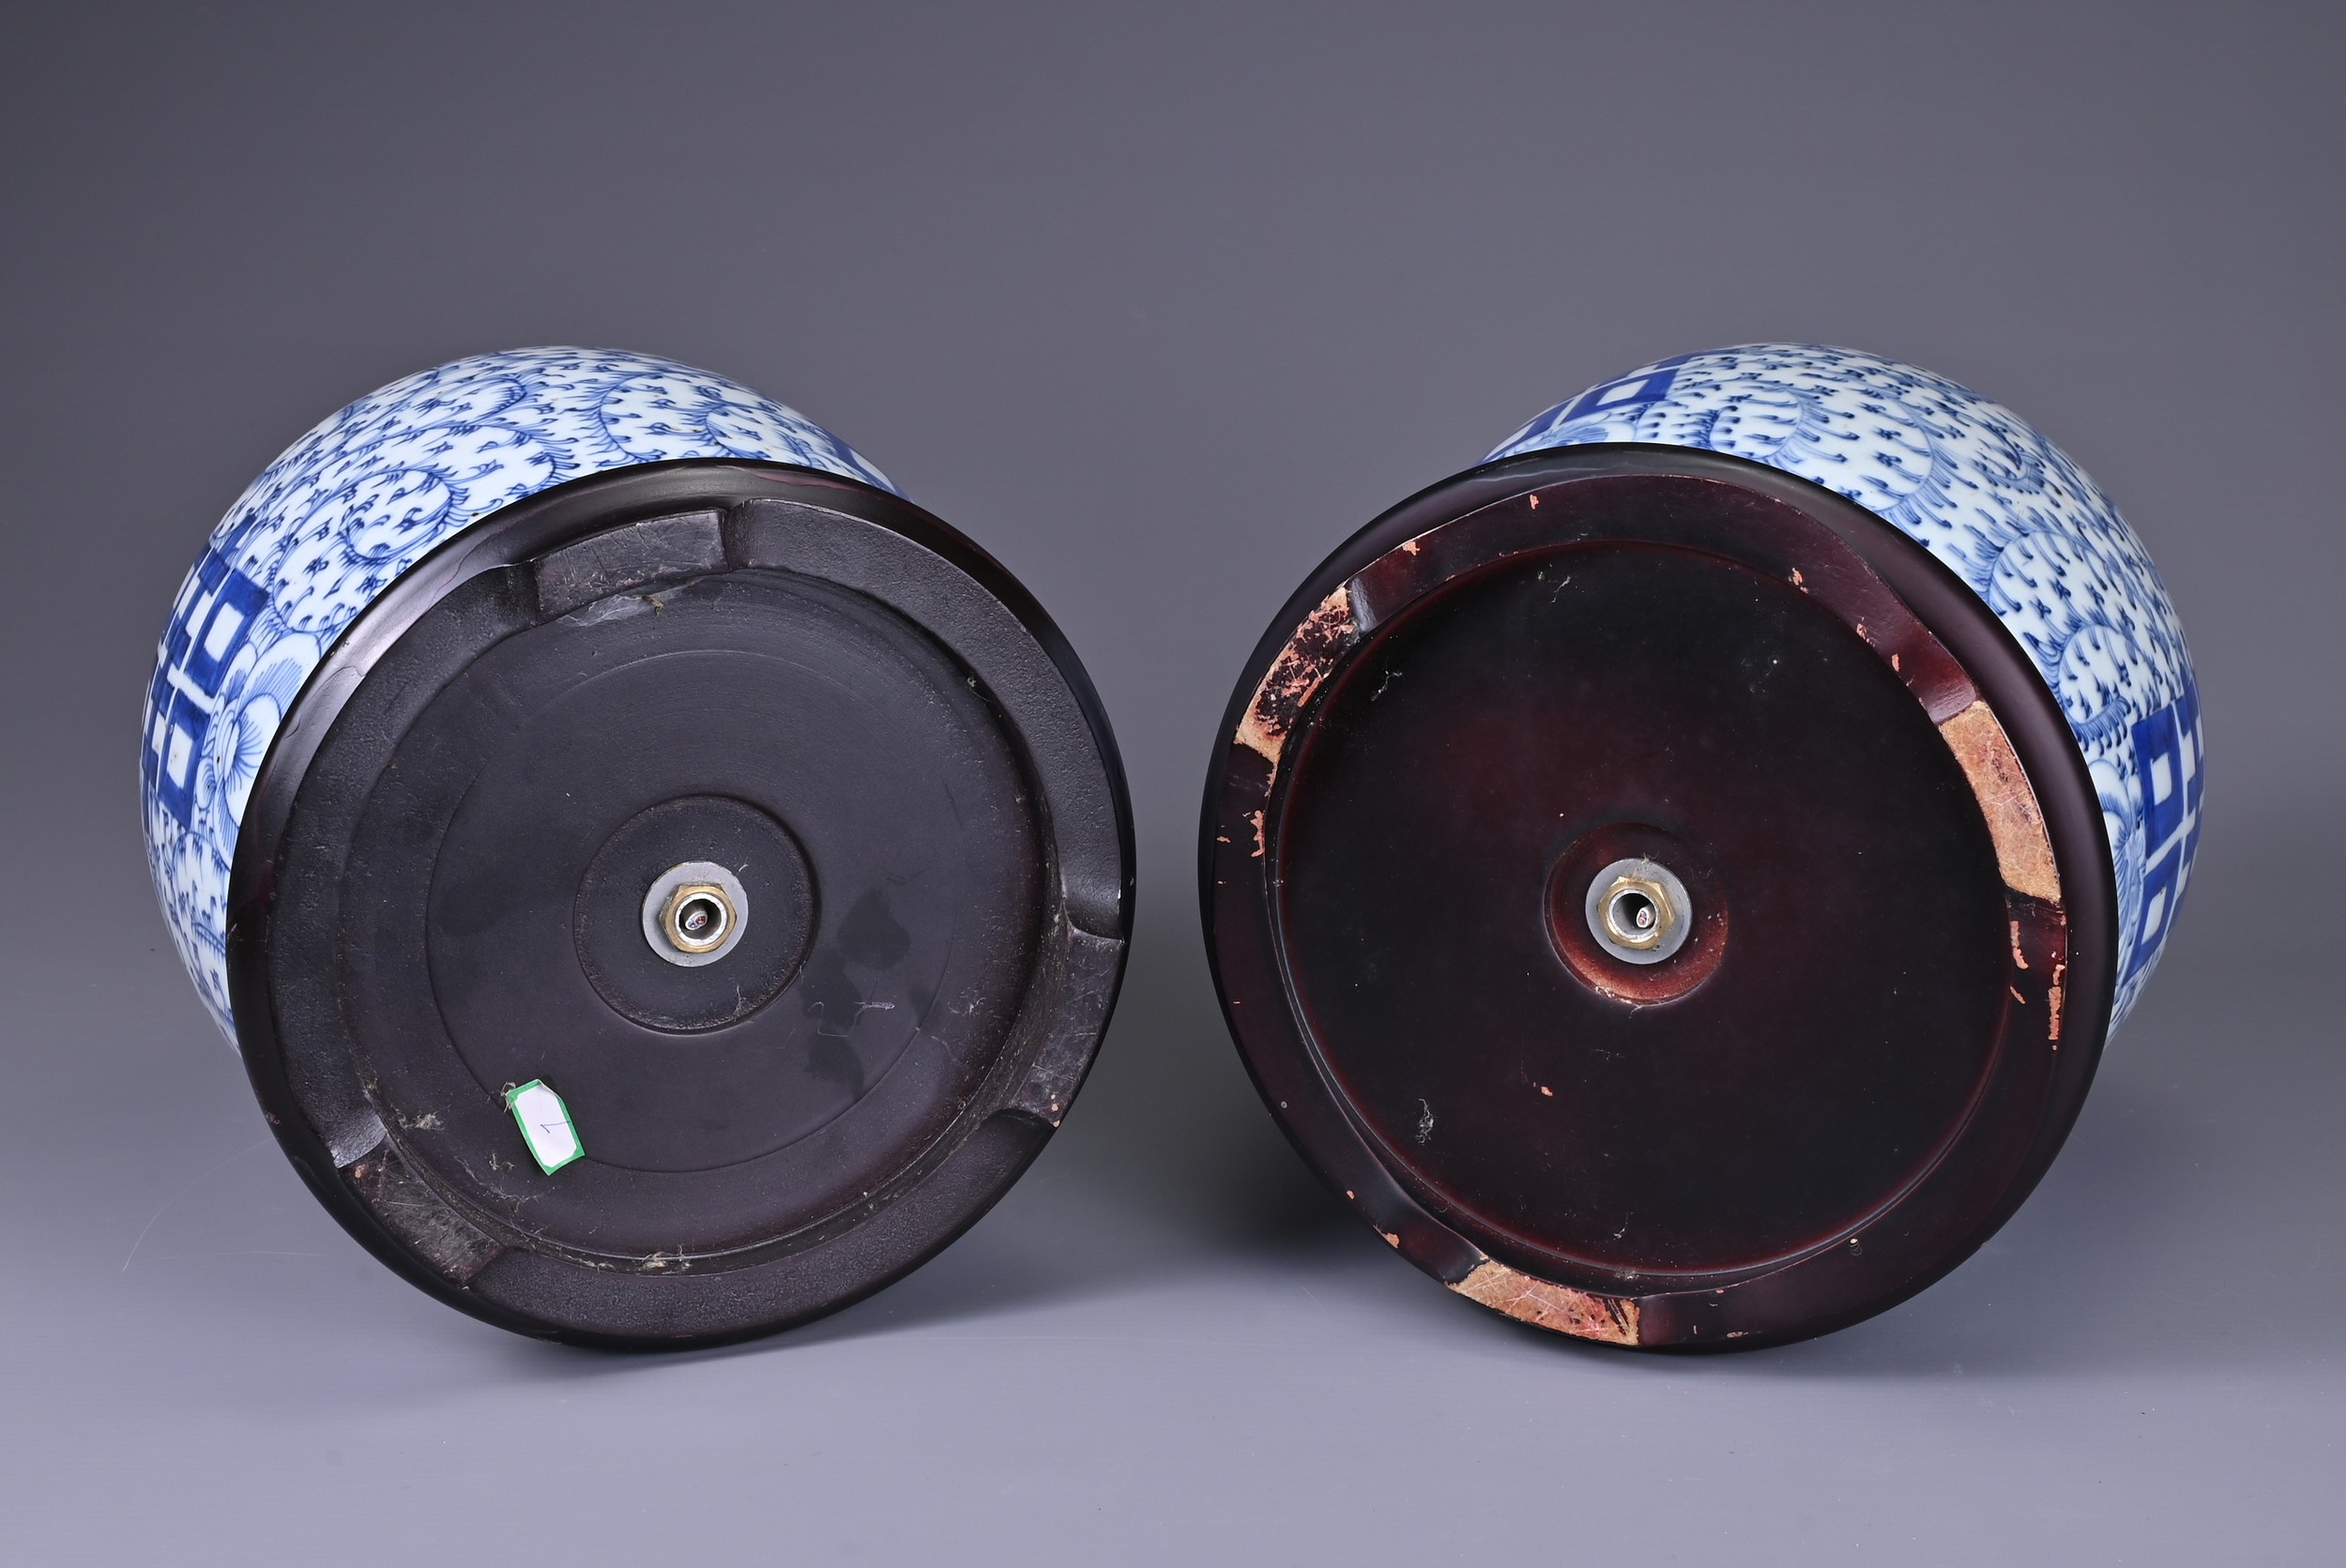 A PAIR OF 19TH CENTURY CHINESE PORCELAIN GINGER JARS MOUNTED AS LAMPS. Each decorated with scrolling - Image 5 of 5